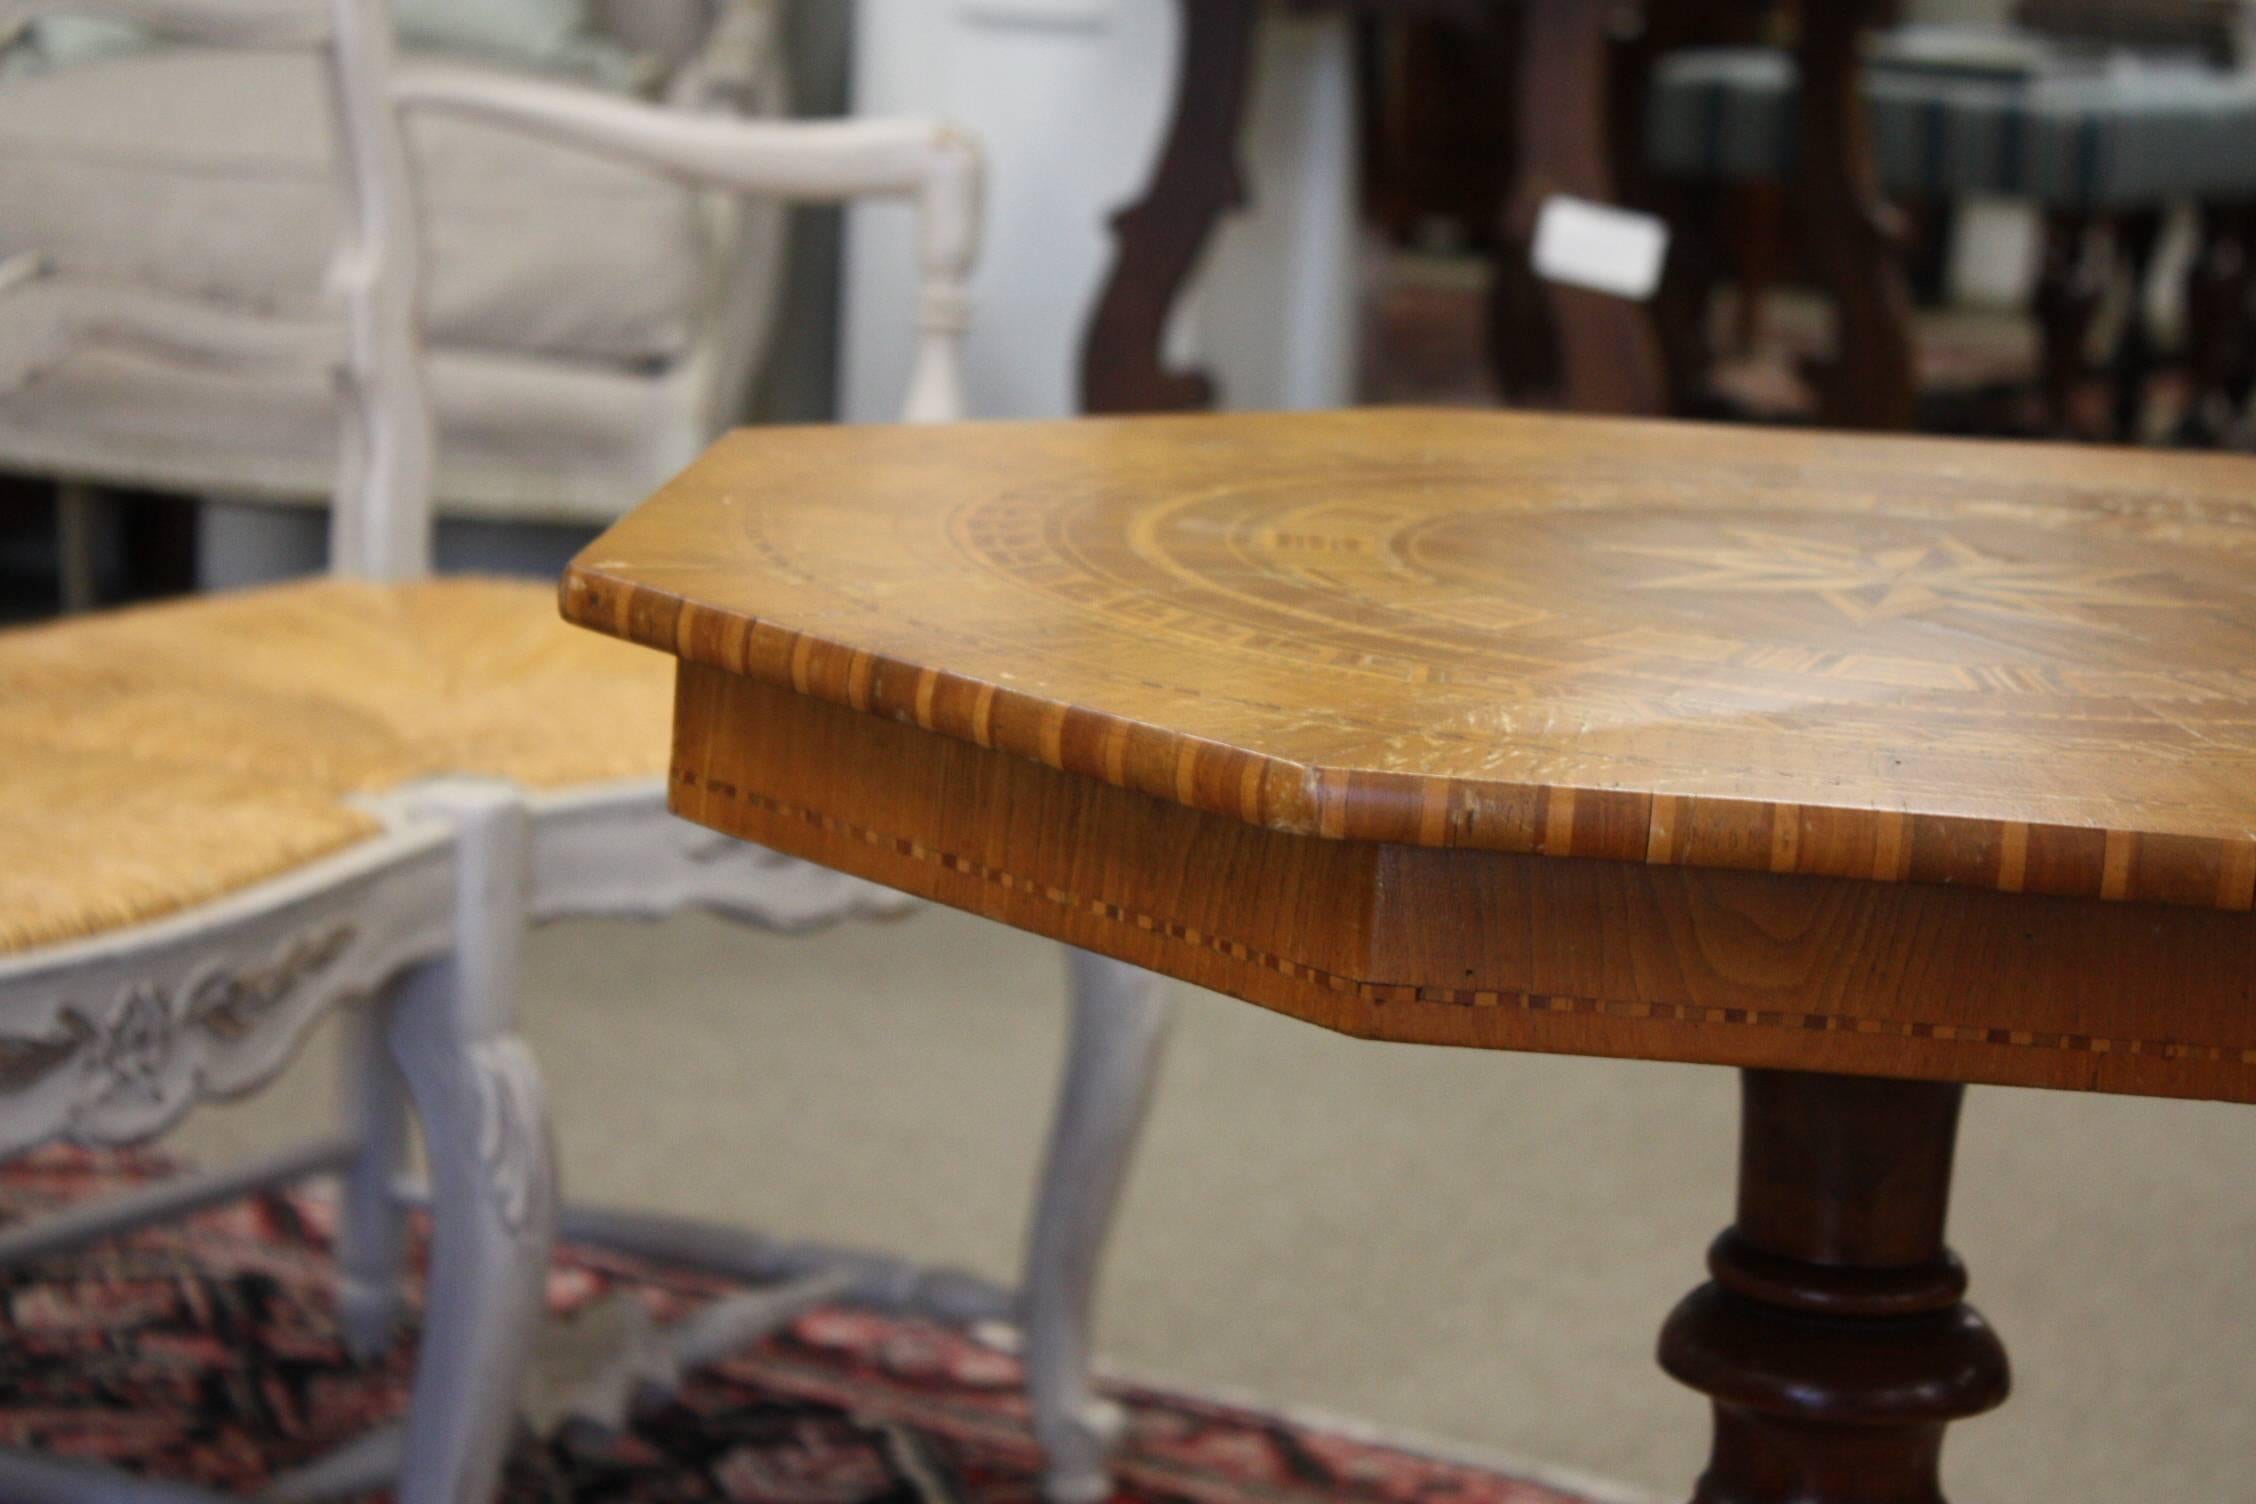 Italian 19th Century Octagonal Occasional Table with Inlaid Design In Good Condition For Sale In Fairhope, AL